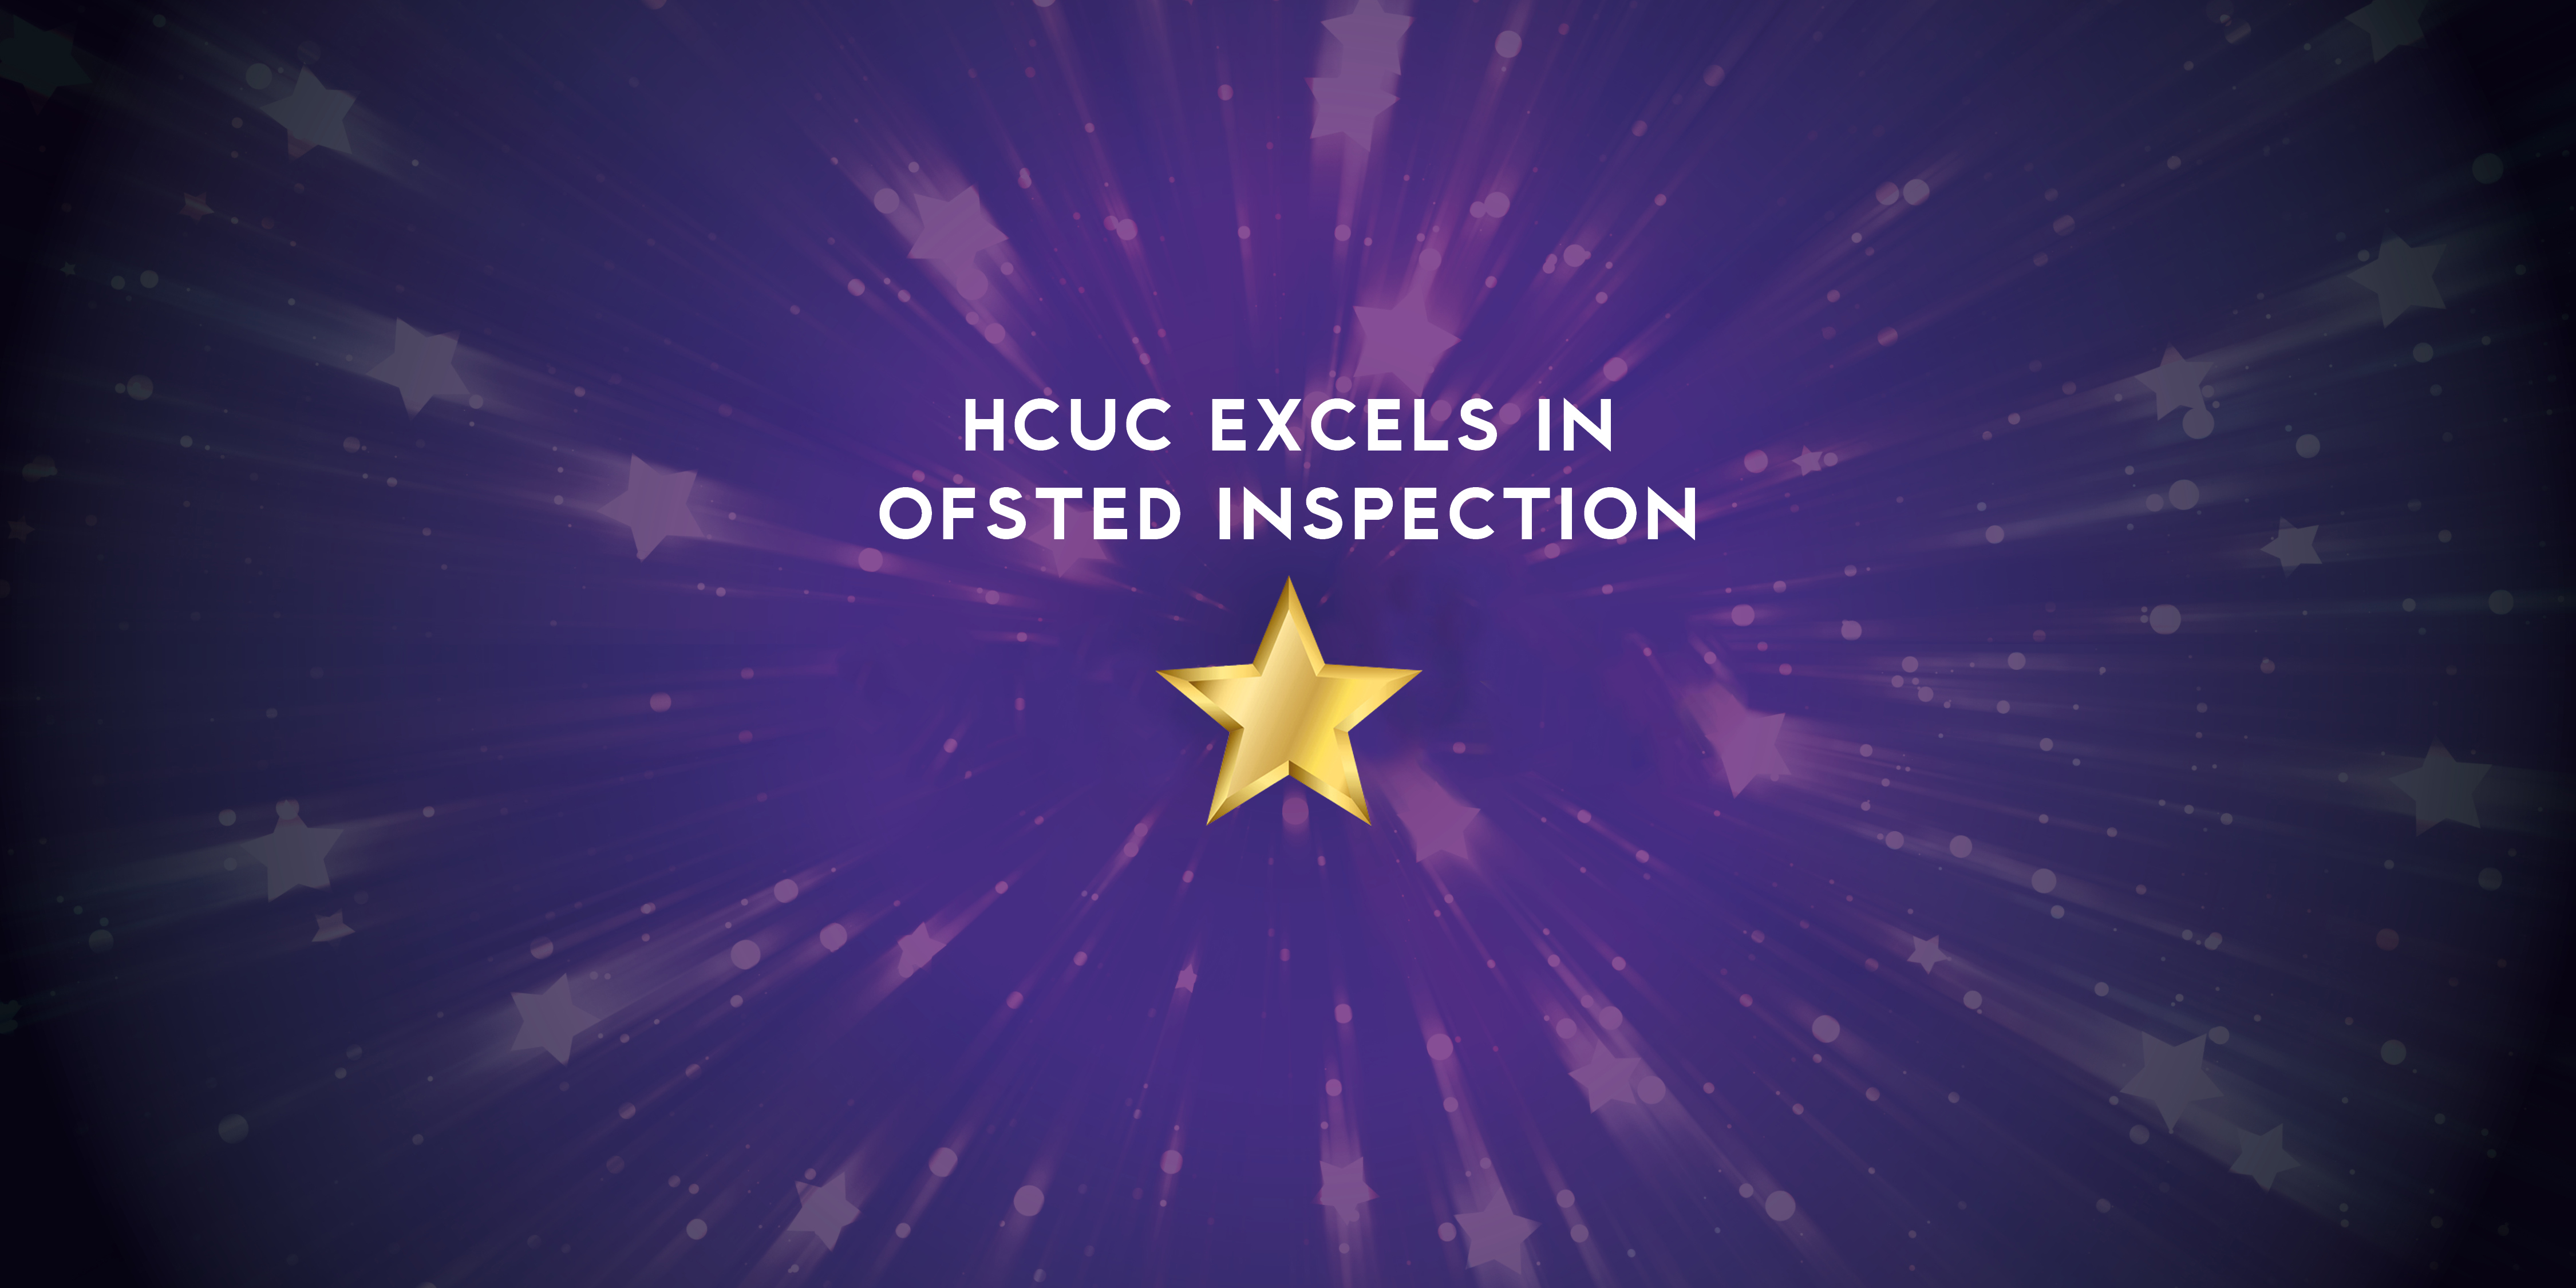 HCUC Excels in ofsted inspection